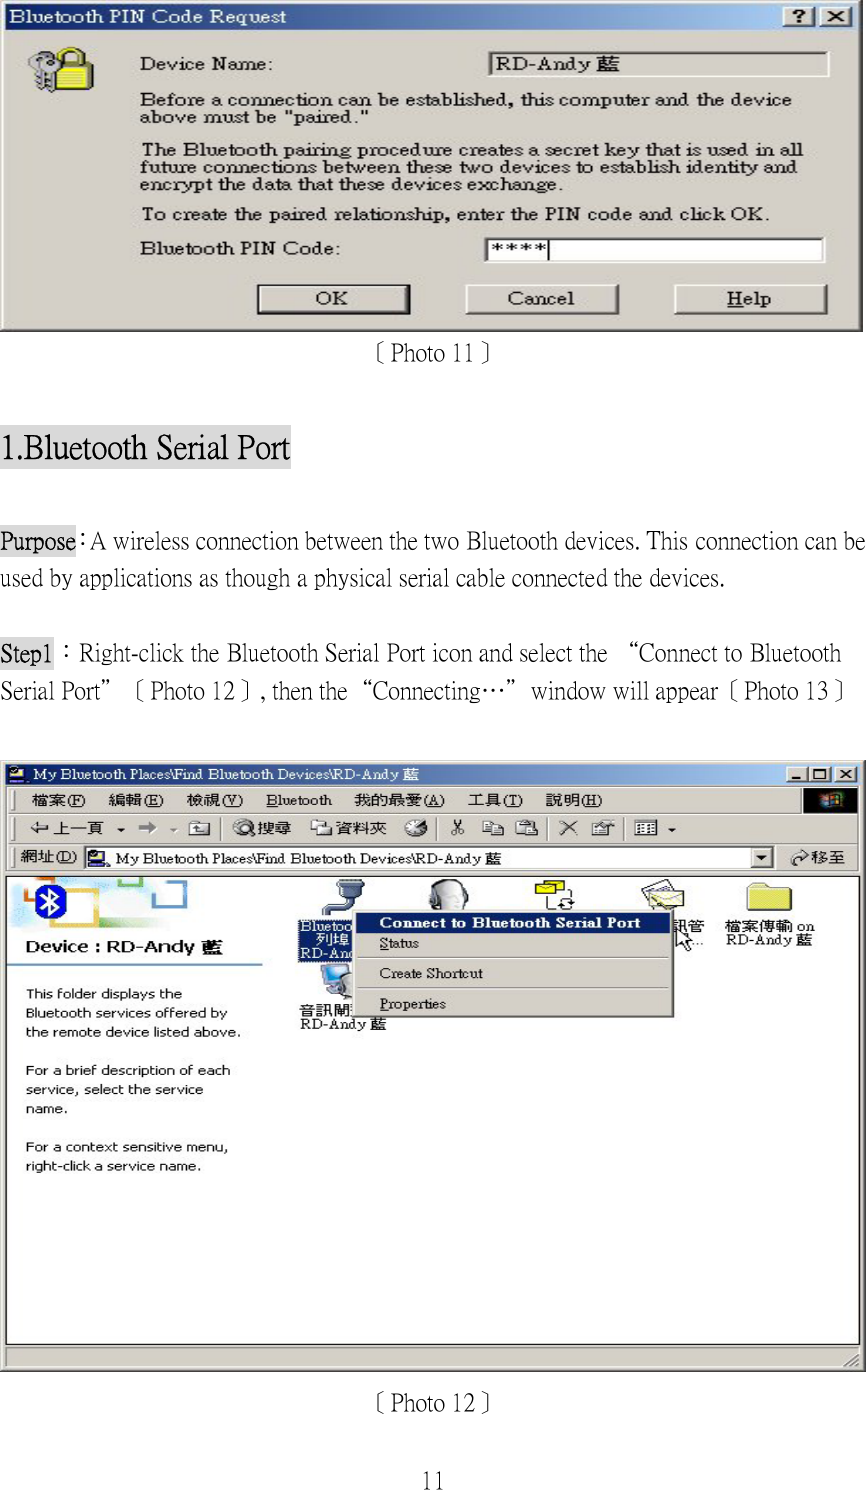 11  〔Photo 11〕  1.Bluetooth Serial Port  Purpose：A wireless connection between the two Bluetooth devices. This connection can be used by applications as though a physical serial cable connected the devices.  Step1：Right-click the Bluetooth Serial Port icon and select the “Connect to Bluetooth Serial Port”〔Photo 12〕, then the“Connecting…”window will appear〔Photo 13〕   〔Photo 12〕 